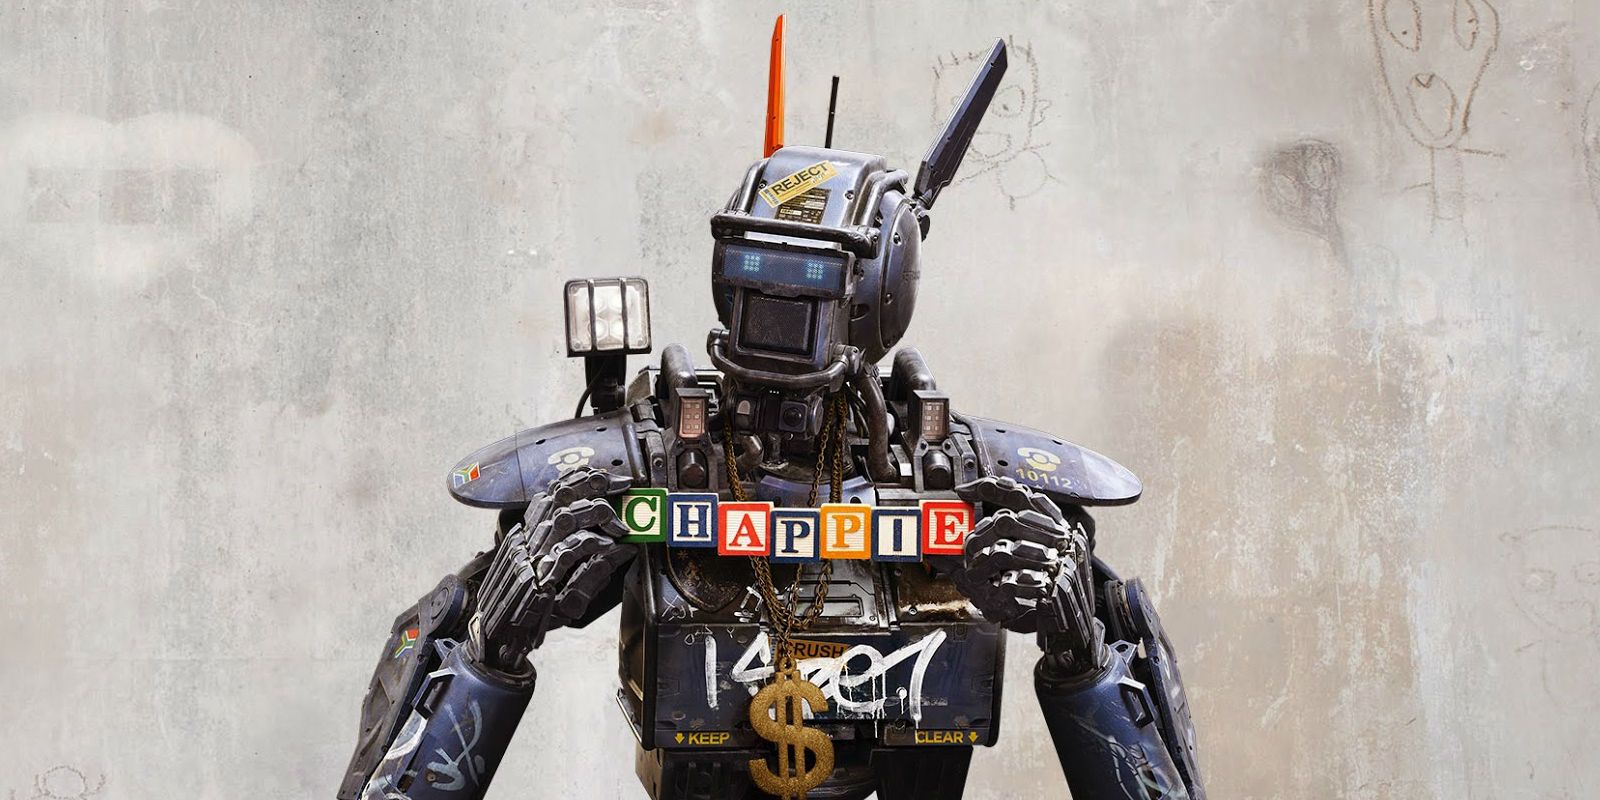 Chappie in Chappie